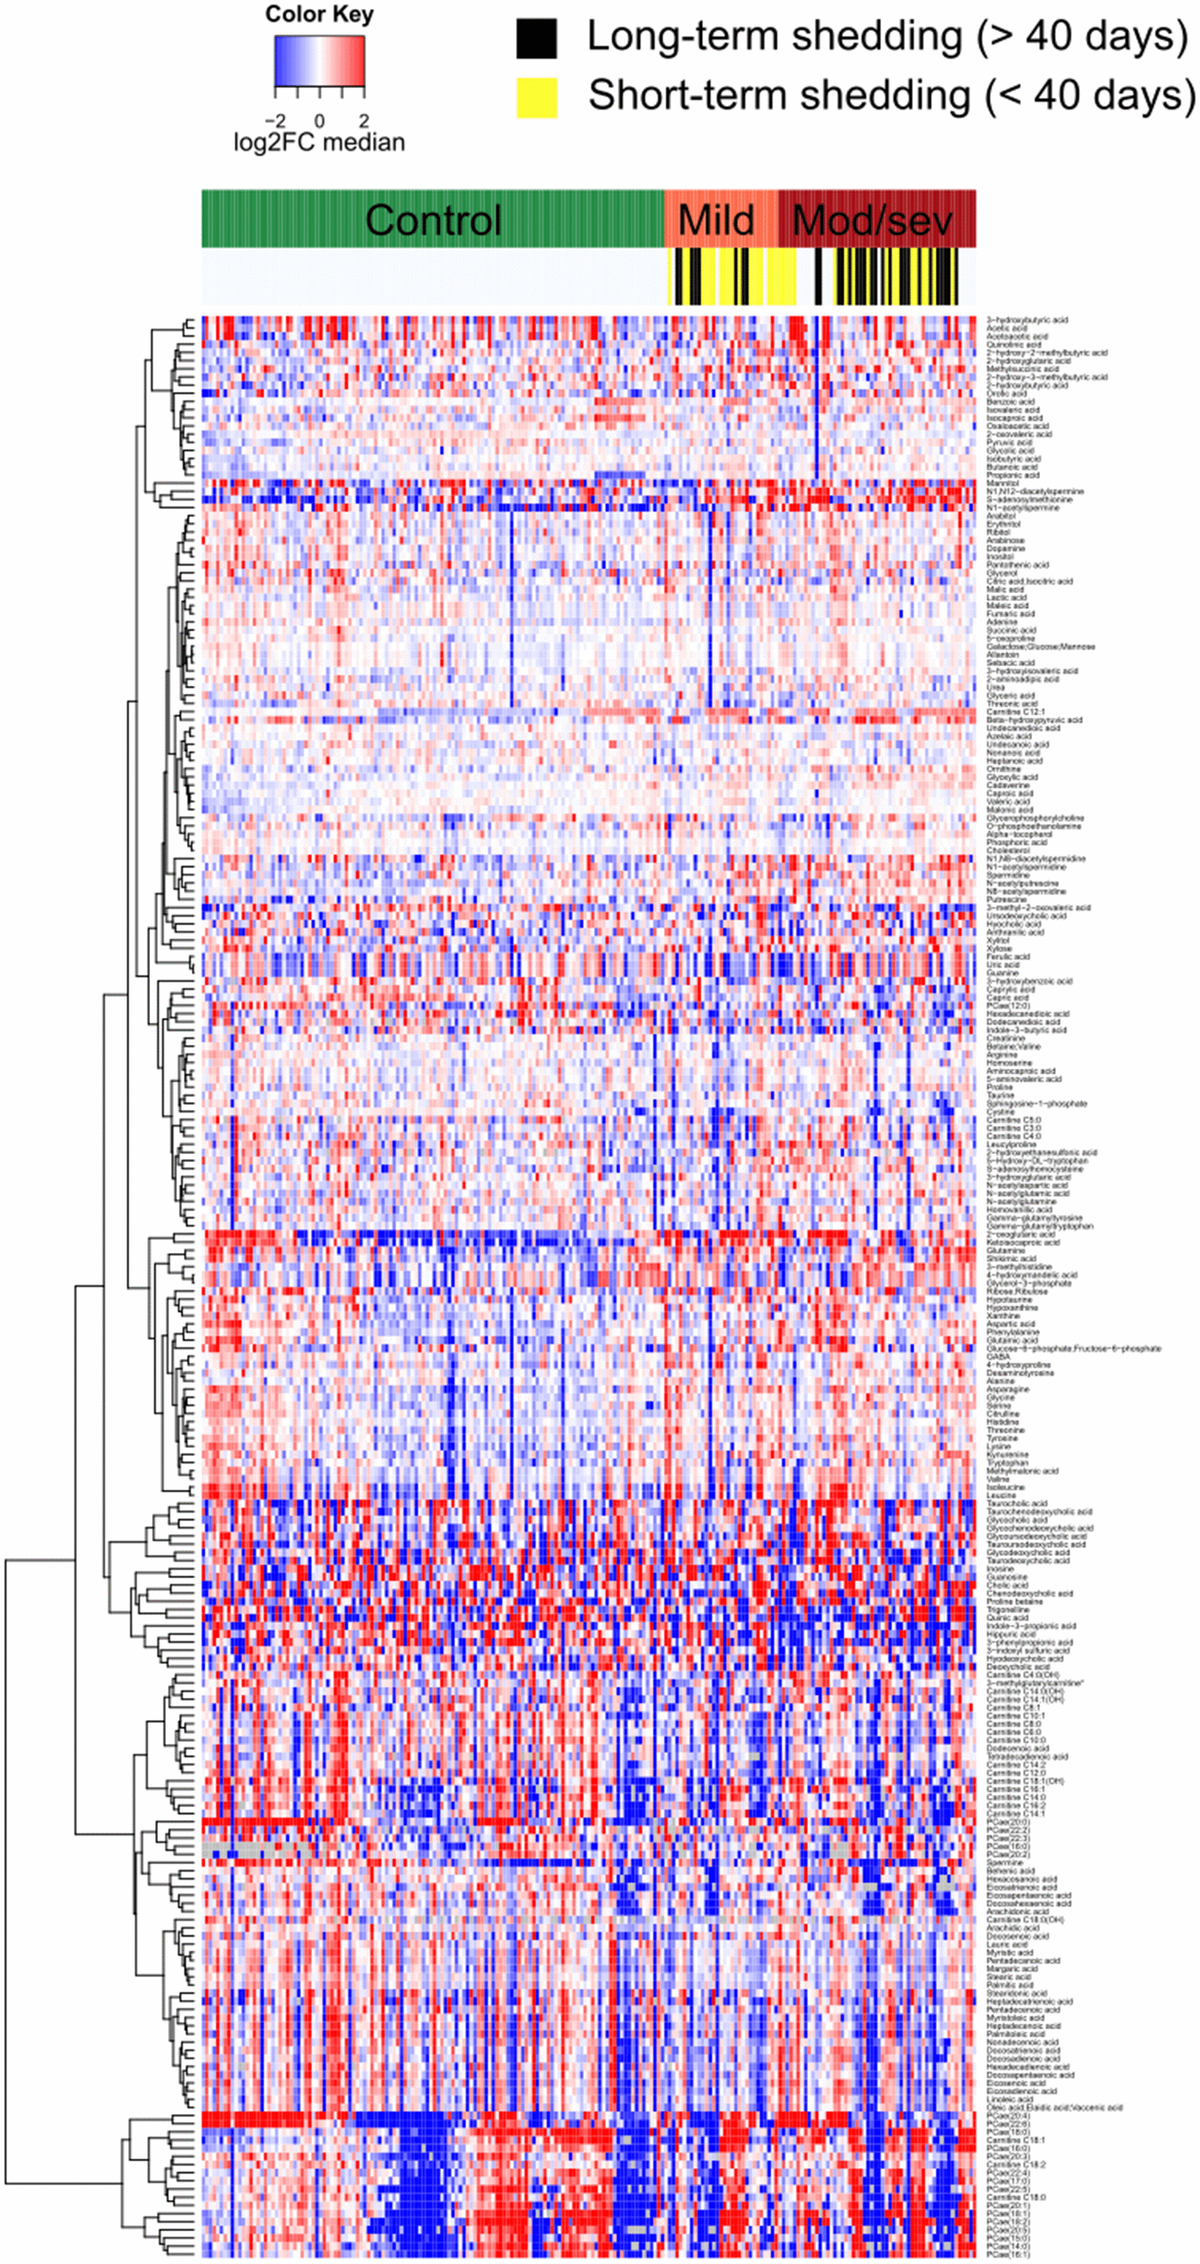 Heatmap representing the serum metabolome of each individual cancer patient clustered by clinical severity of Covid-19. Targeted metabolomic data on 211 serum samples from 204 patients were normalized areas of identified metabolites. Results are listed in Supplementary Table 1.